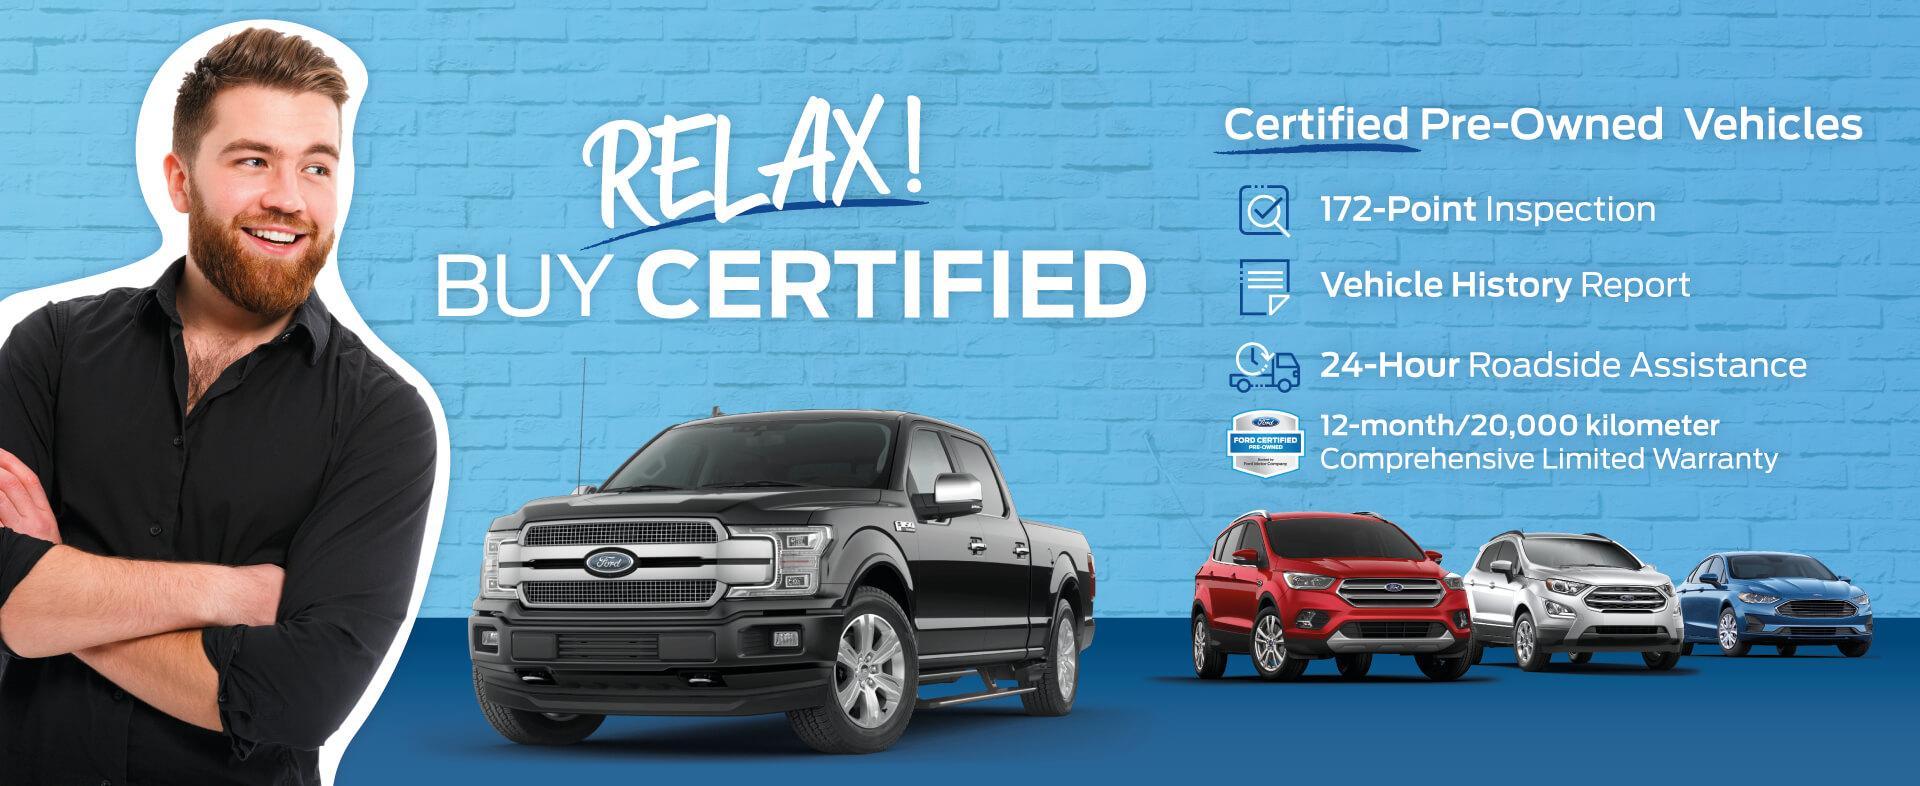 Certified Pre-owned Vehicles